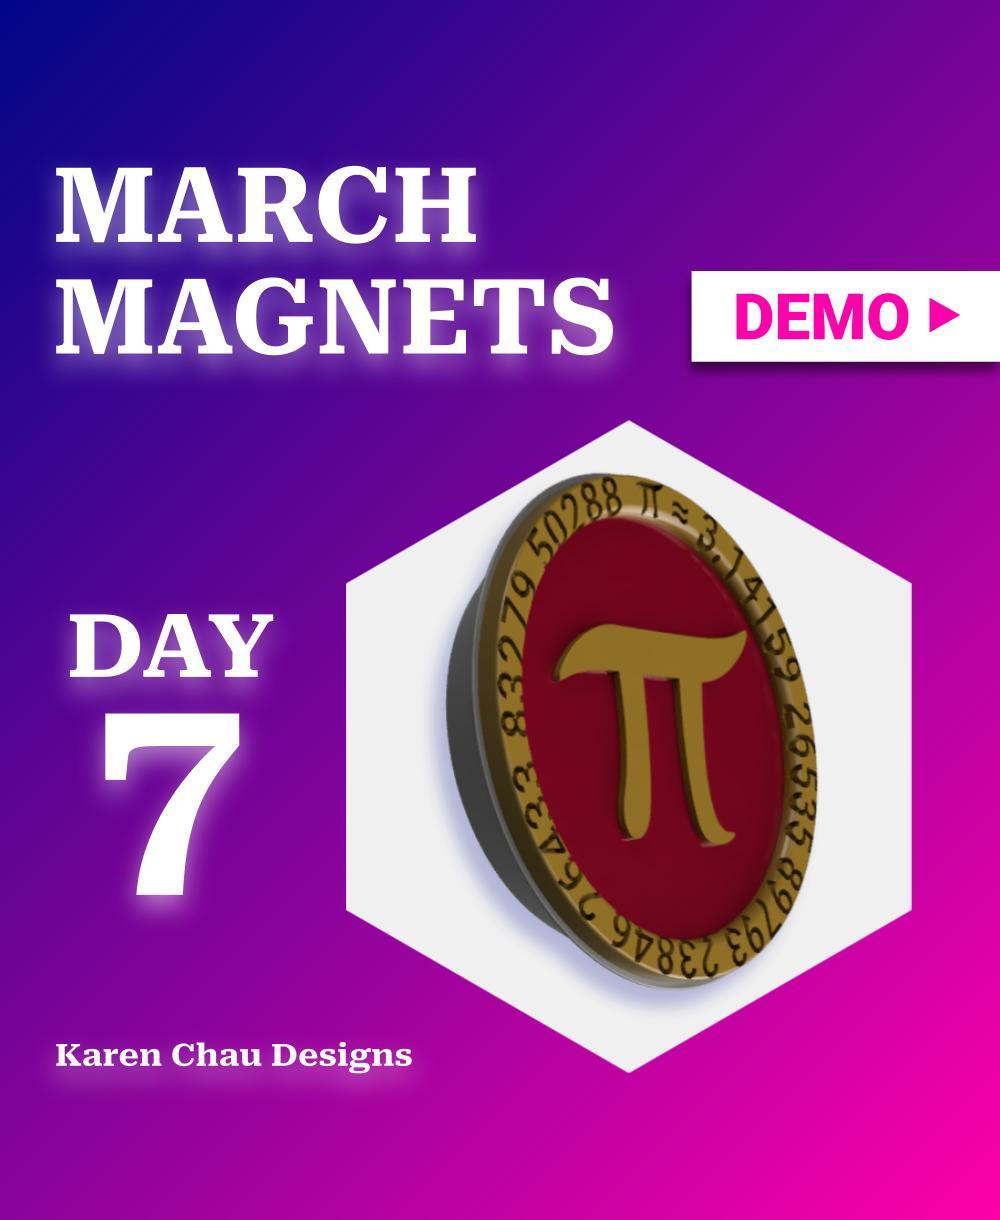 March Magnets - Day 7 #marchmagnets | Pie with pi symbol and crust with 3.14 (and more digits) 3d model